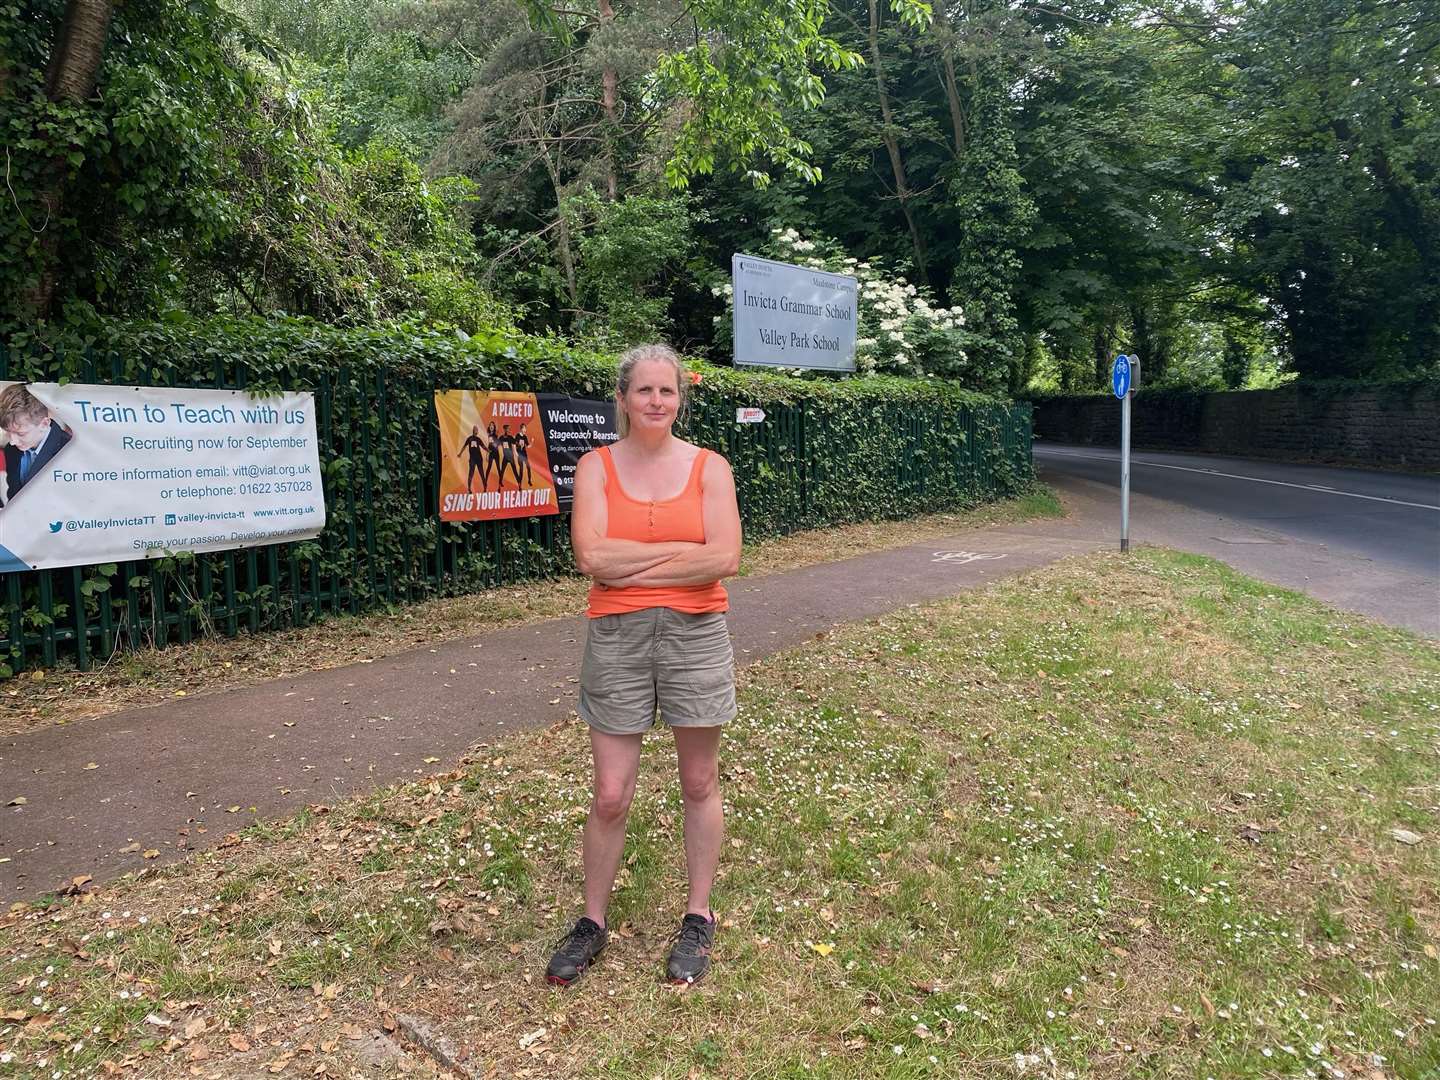 Kate Moore at the site of the proposed 5G mast, close to Invicta Grammar School and Valley Park. Right, how it could look